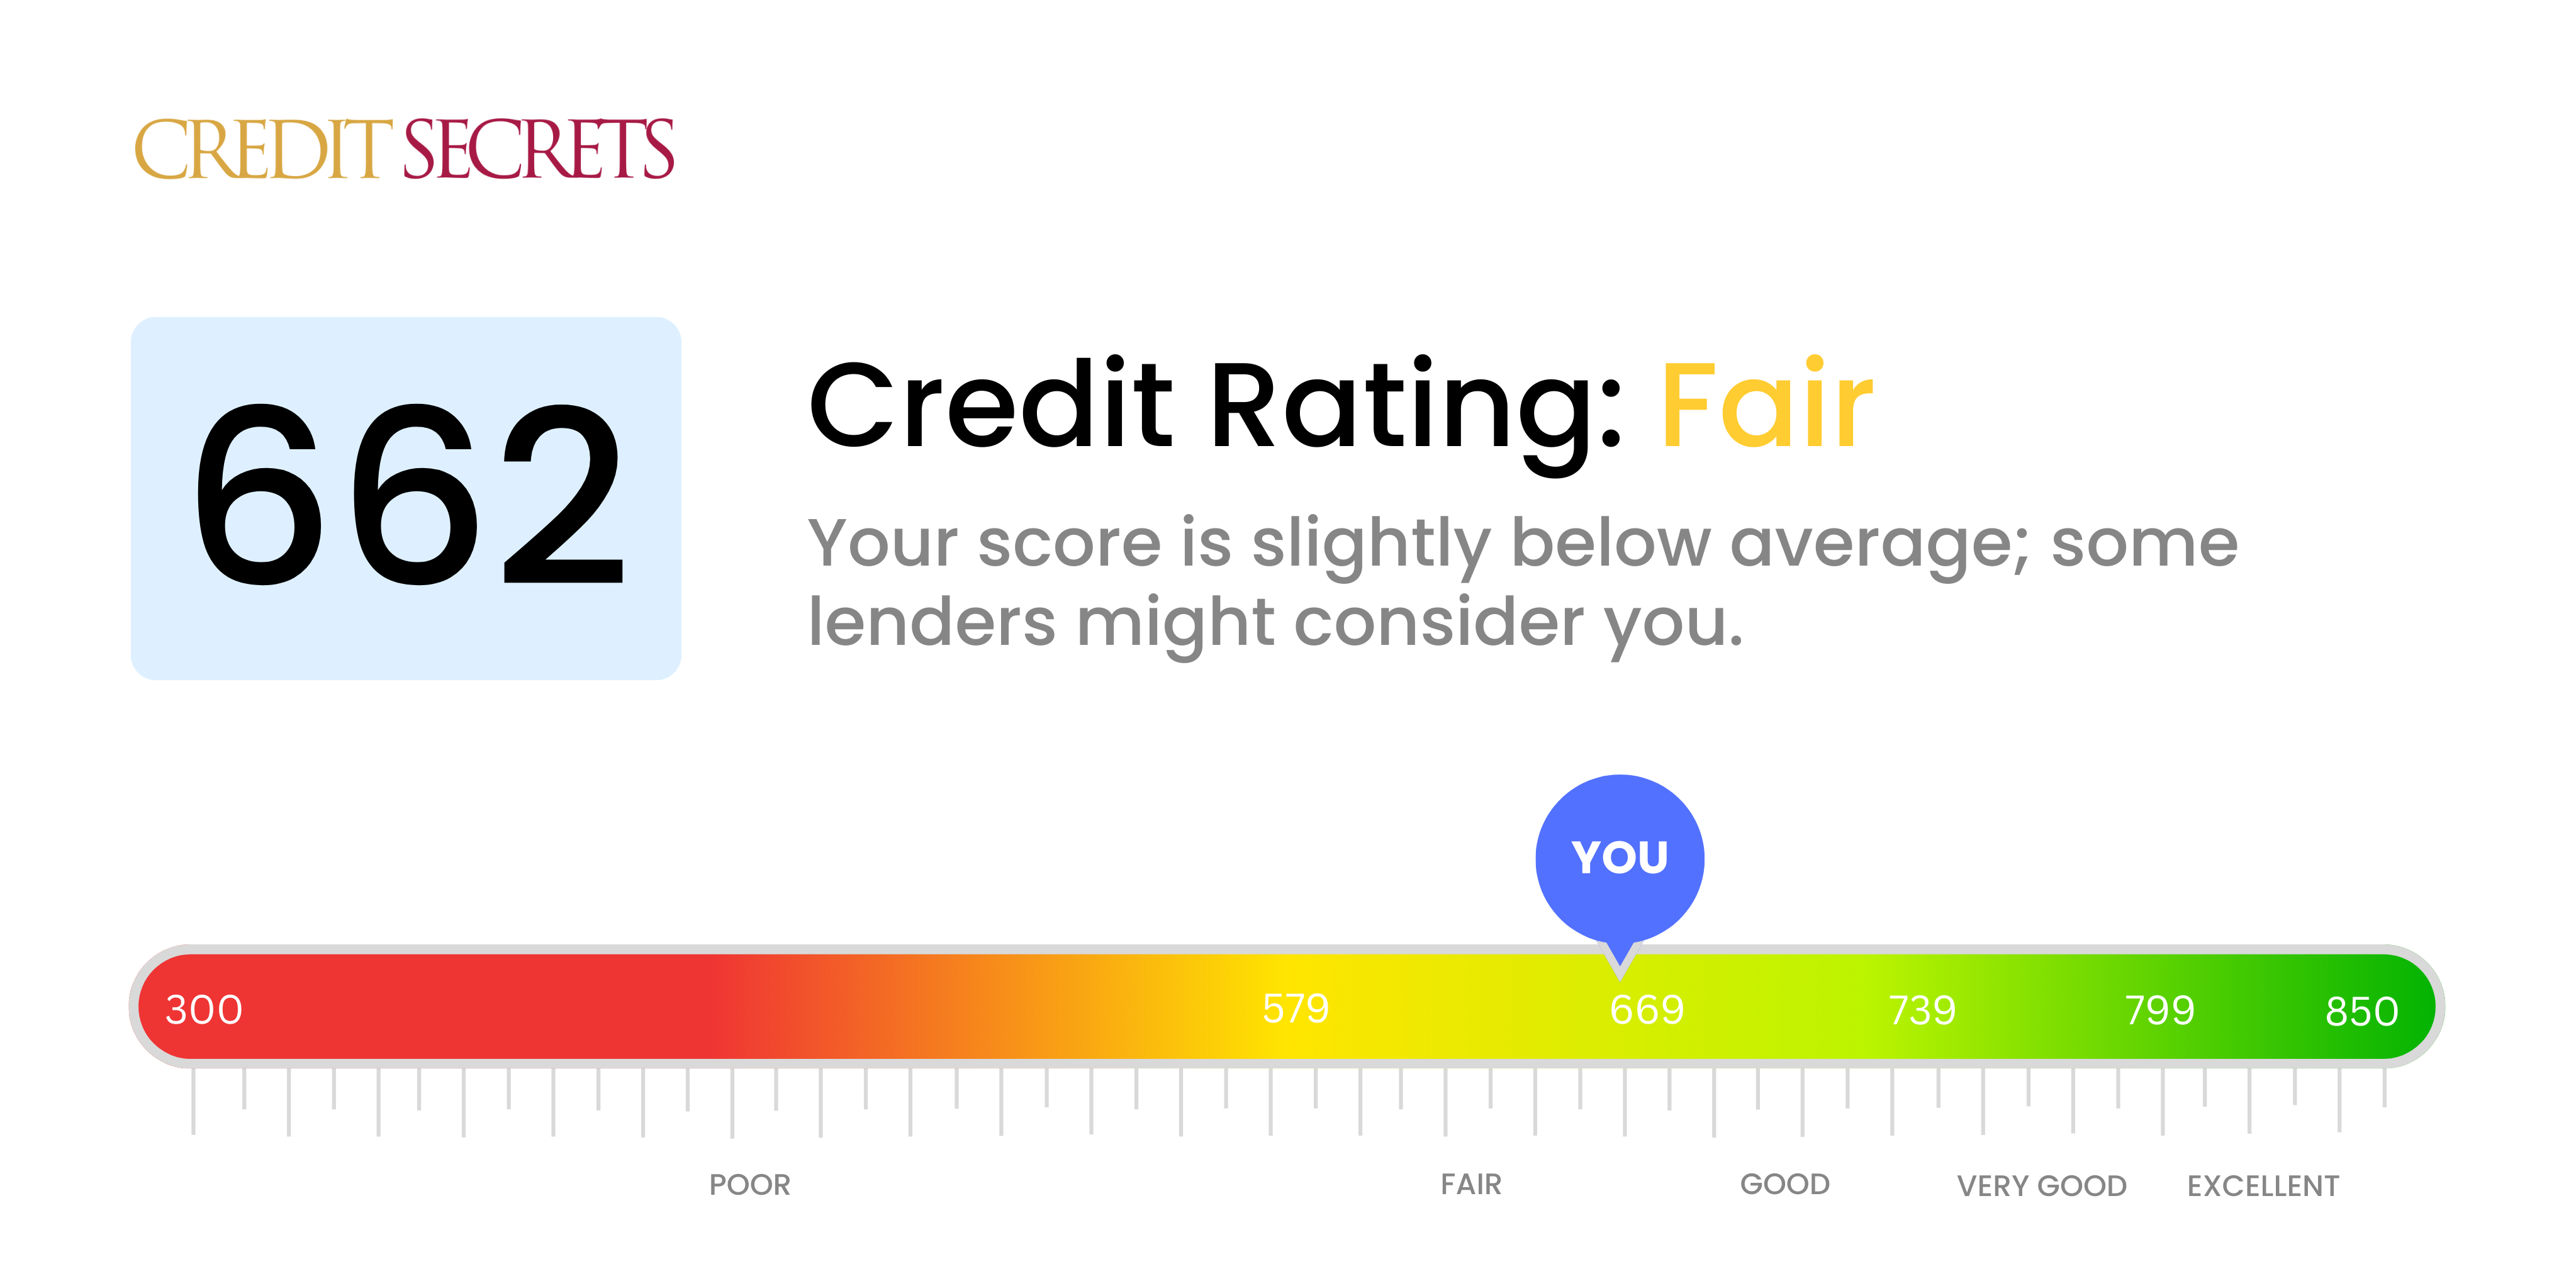 Is 662 a good credit score?